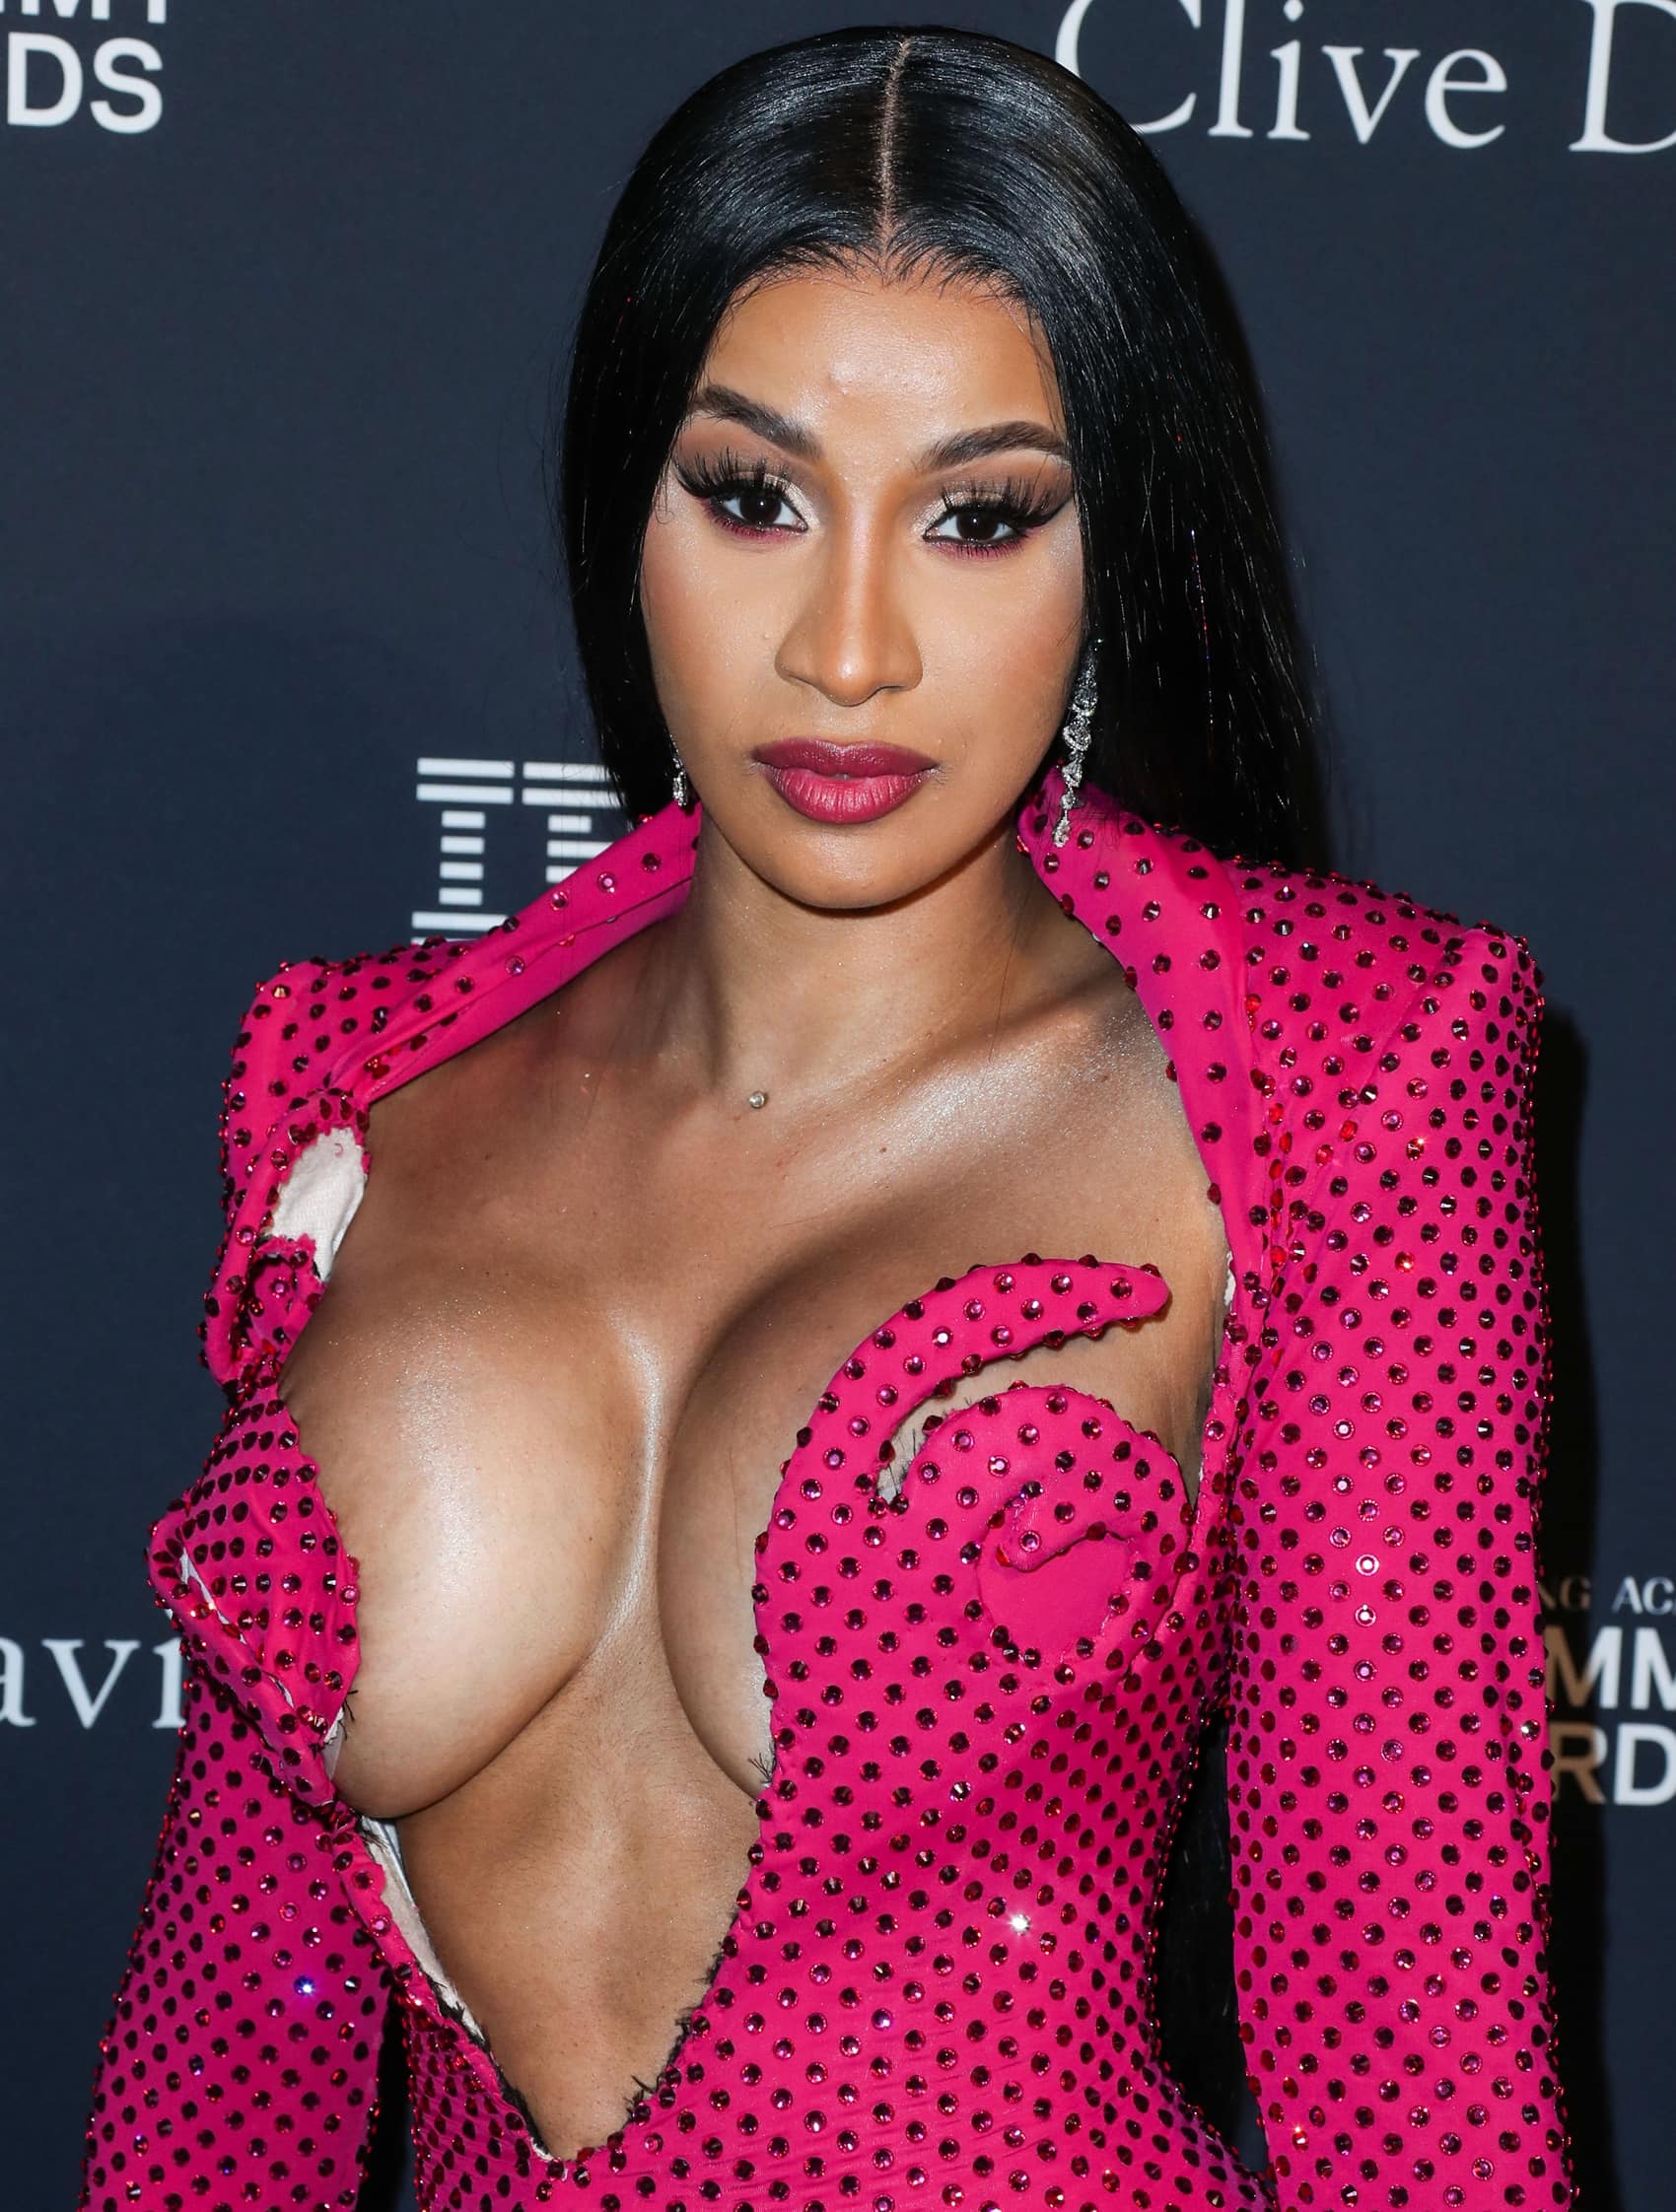 Rapper Cardi B wearing a Nicolas Jebran dress arrives at The Recording Academy And Clive Davis' 2020 Pre-GRAMMY Gala